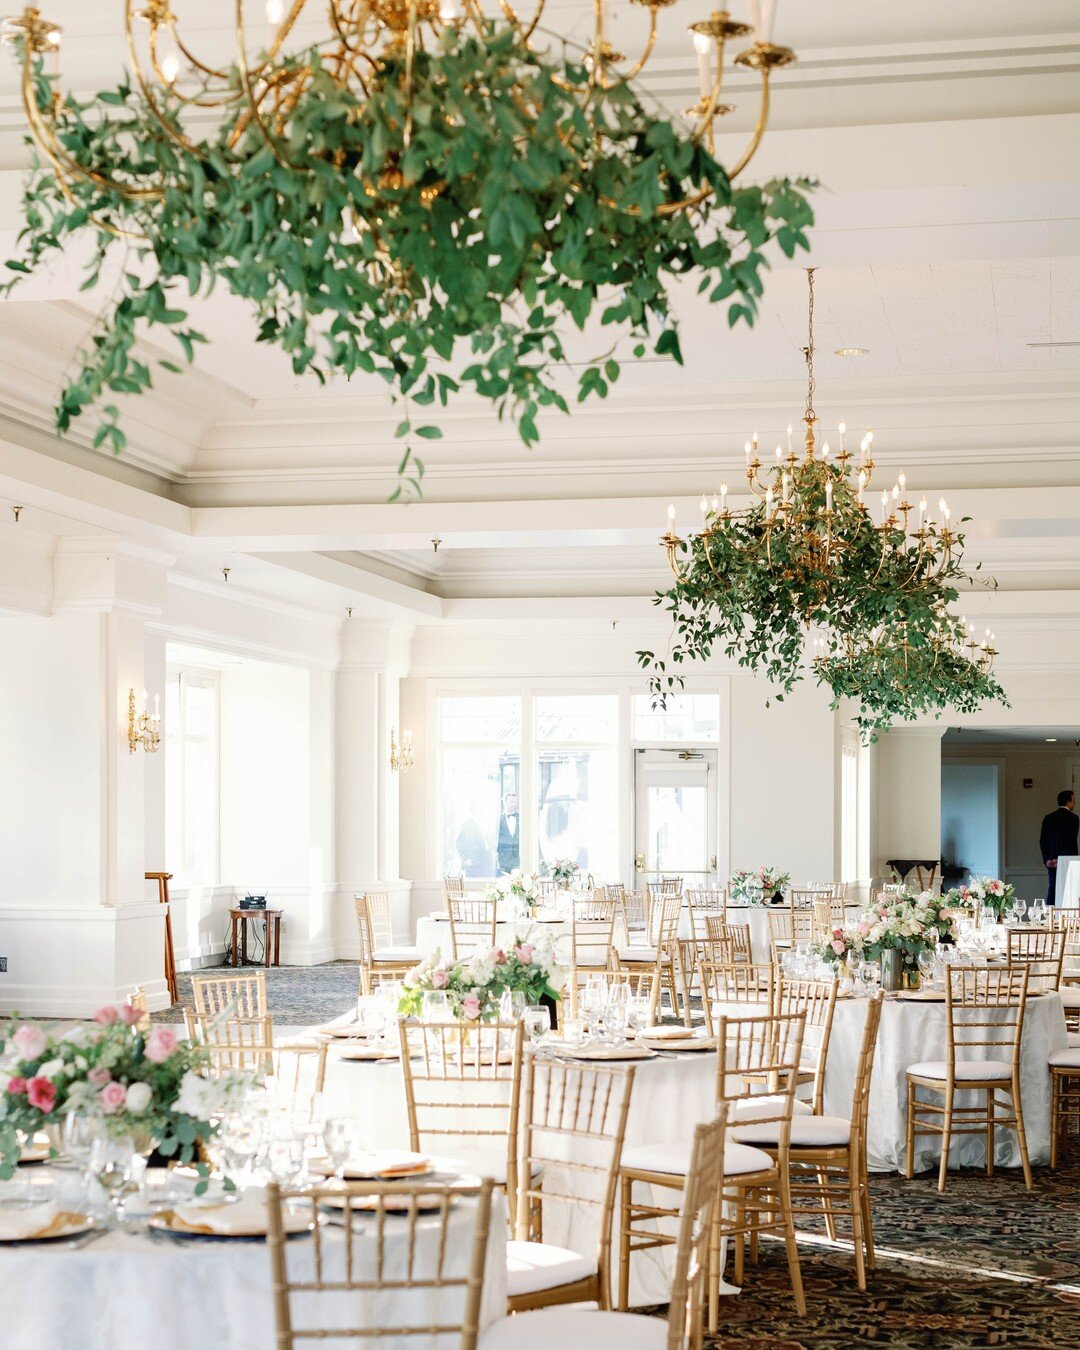 Creating that wow moment at your reception is kinda our thing! Even simple smilax vine intertwined around chandeliers can totally transform a space 🌿
&bull;
&bull;
&bull;
Photography @mackenzieorth 
Venue @wayzatacountryclub